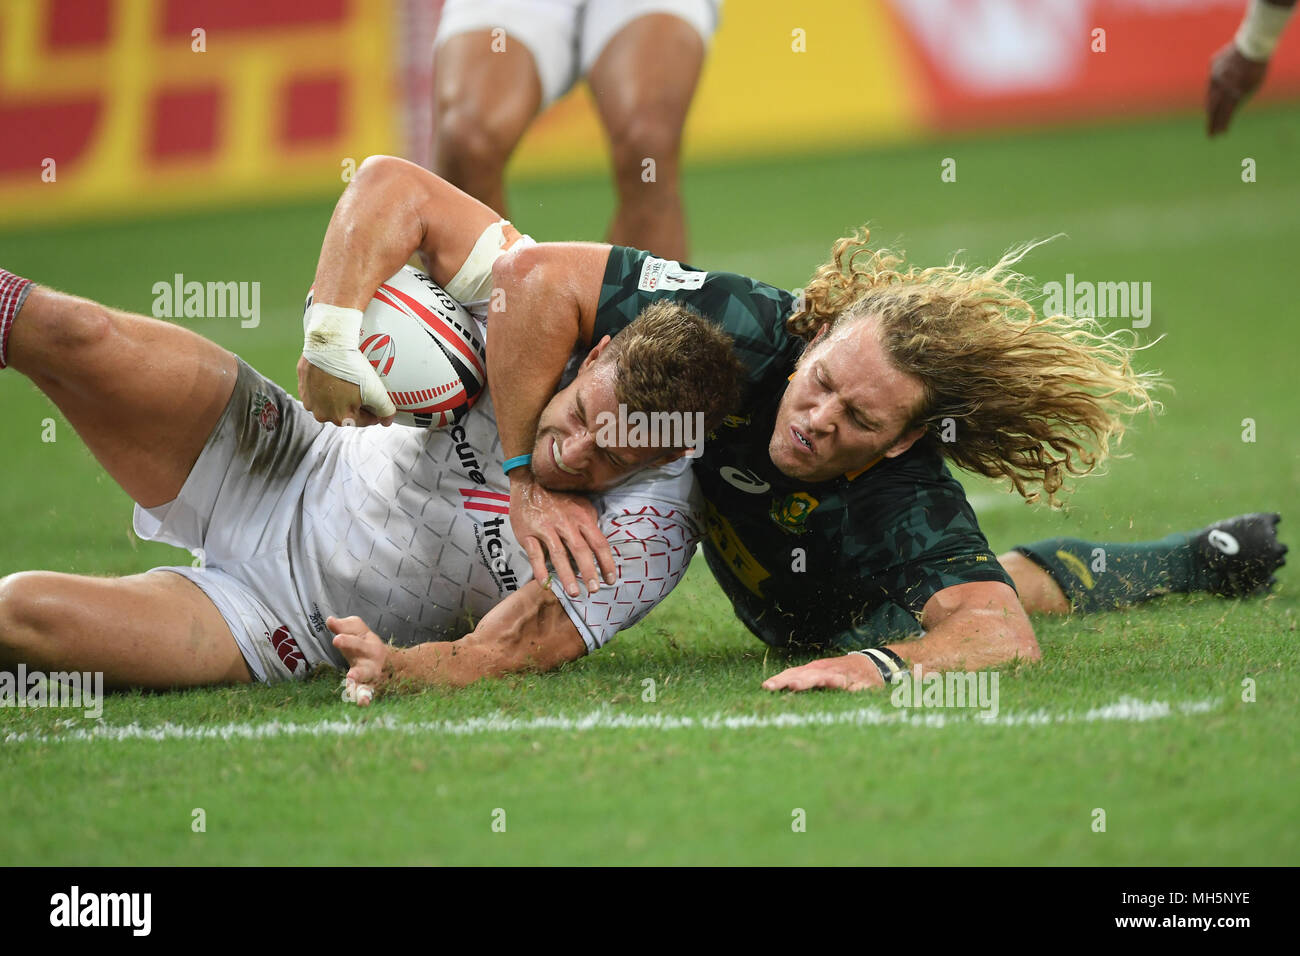 L-R) Tom Mitchell (ENG) and Werner Kok (RSA), APR 29, 2018 - in action during Bronze match HSBC Singapore Rugby 7s 2018 Credit Haruhiko Otsuka/AFLO/Alamy Live News Stock Photo